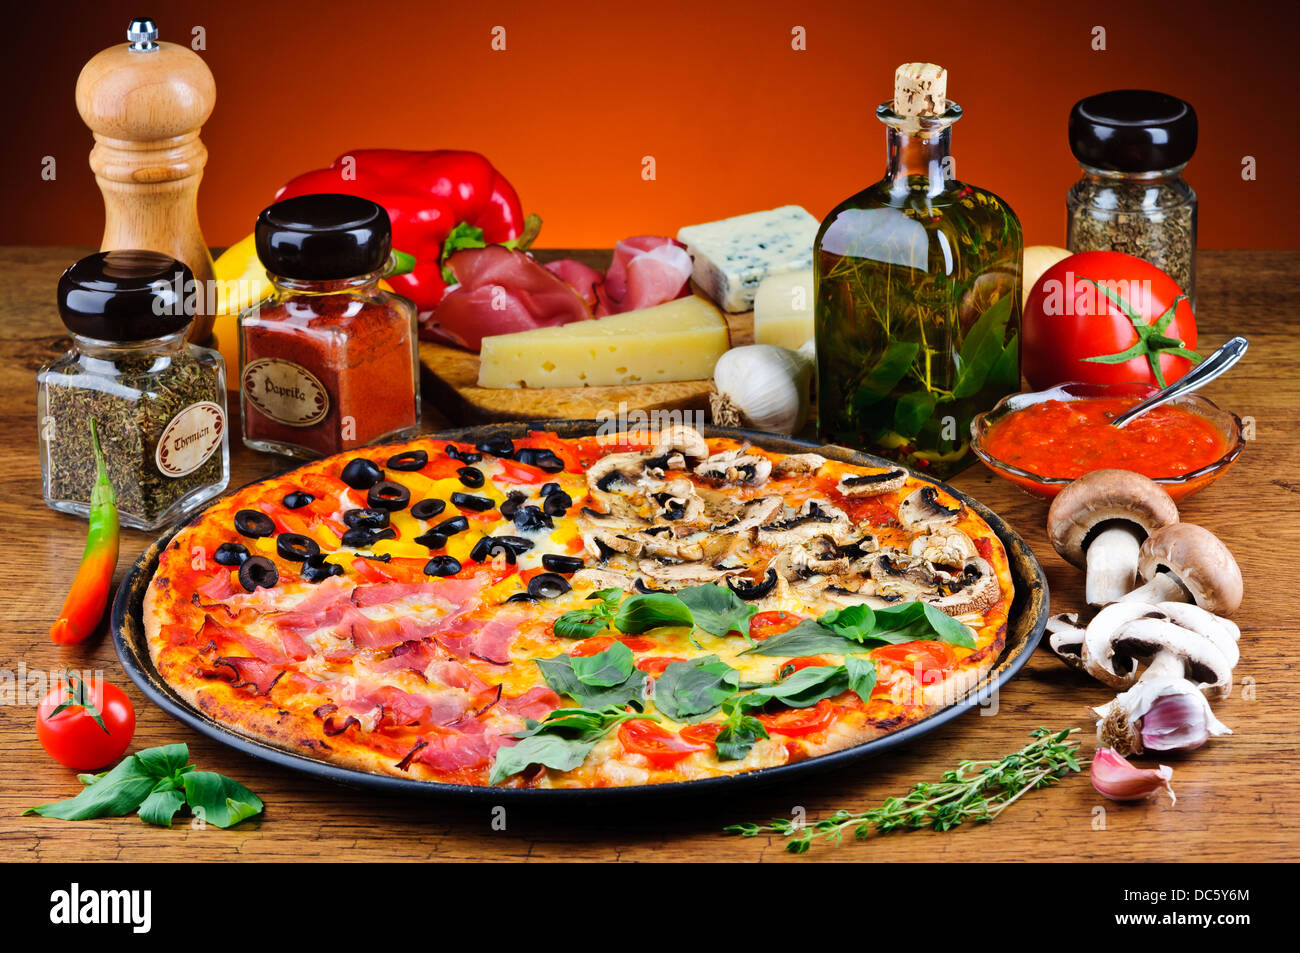 still life with traditional quattro stagioni pizza and ingredients Stock Photo